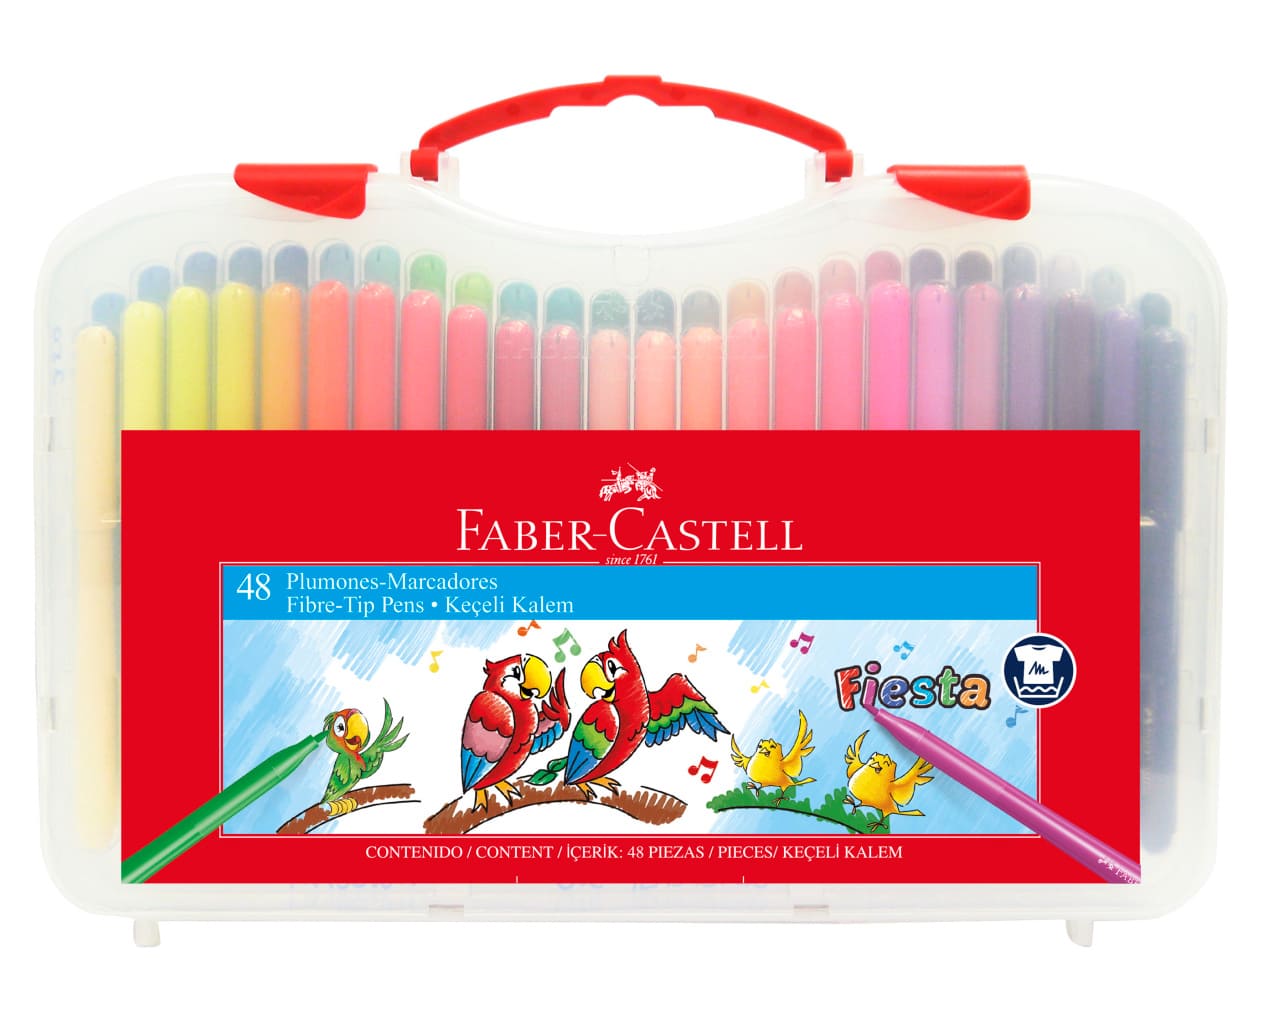 48 Lápices Colores Goldfaber Profesionales Faber Castell